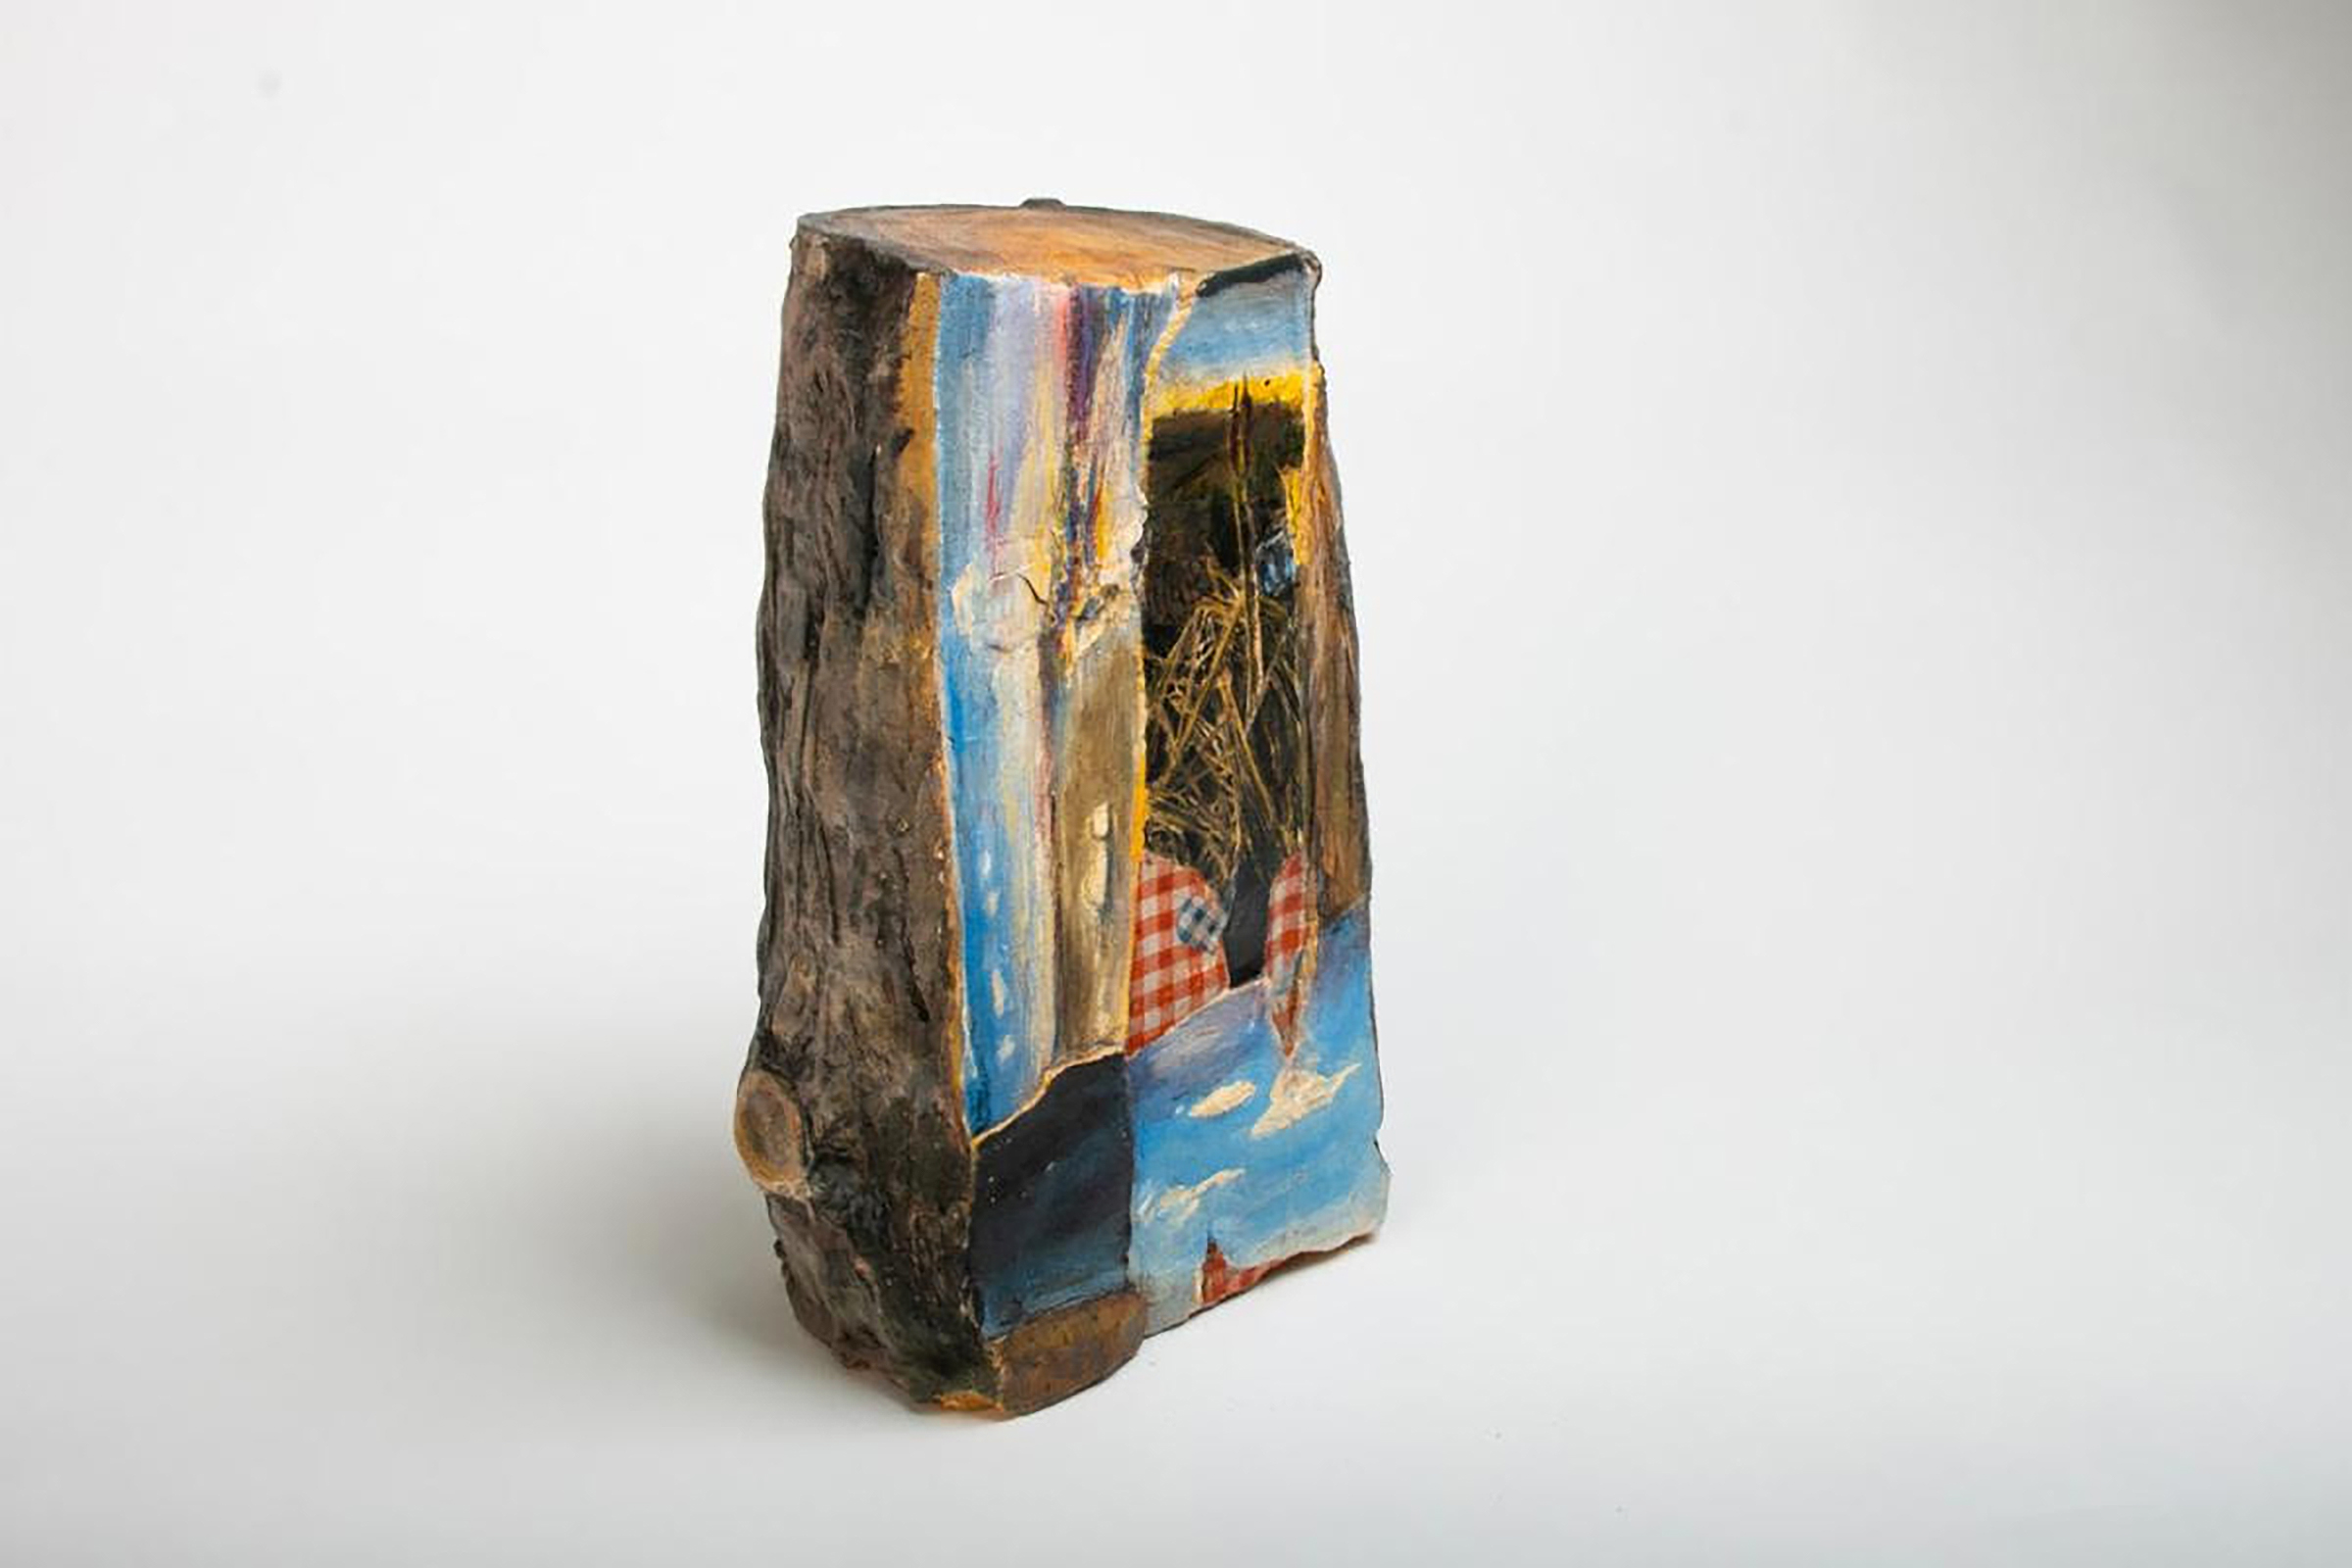 painted wooden object by Edward Steffanni